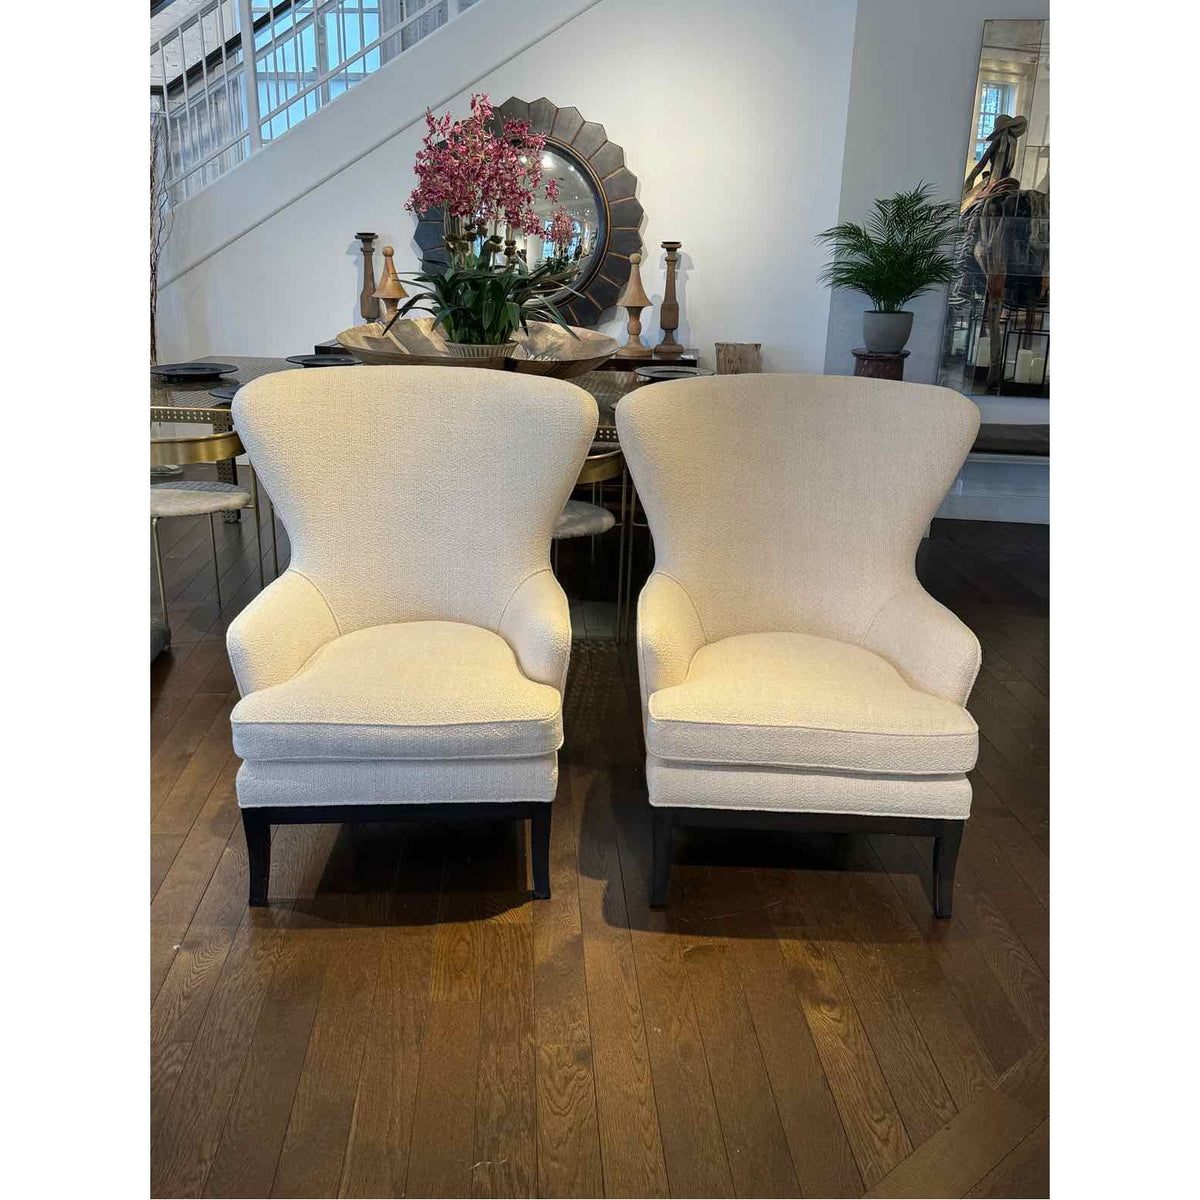 Pair of West Wingback Chairs From Duane Upholstered in a Holland & Sherry Fabric